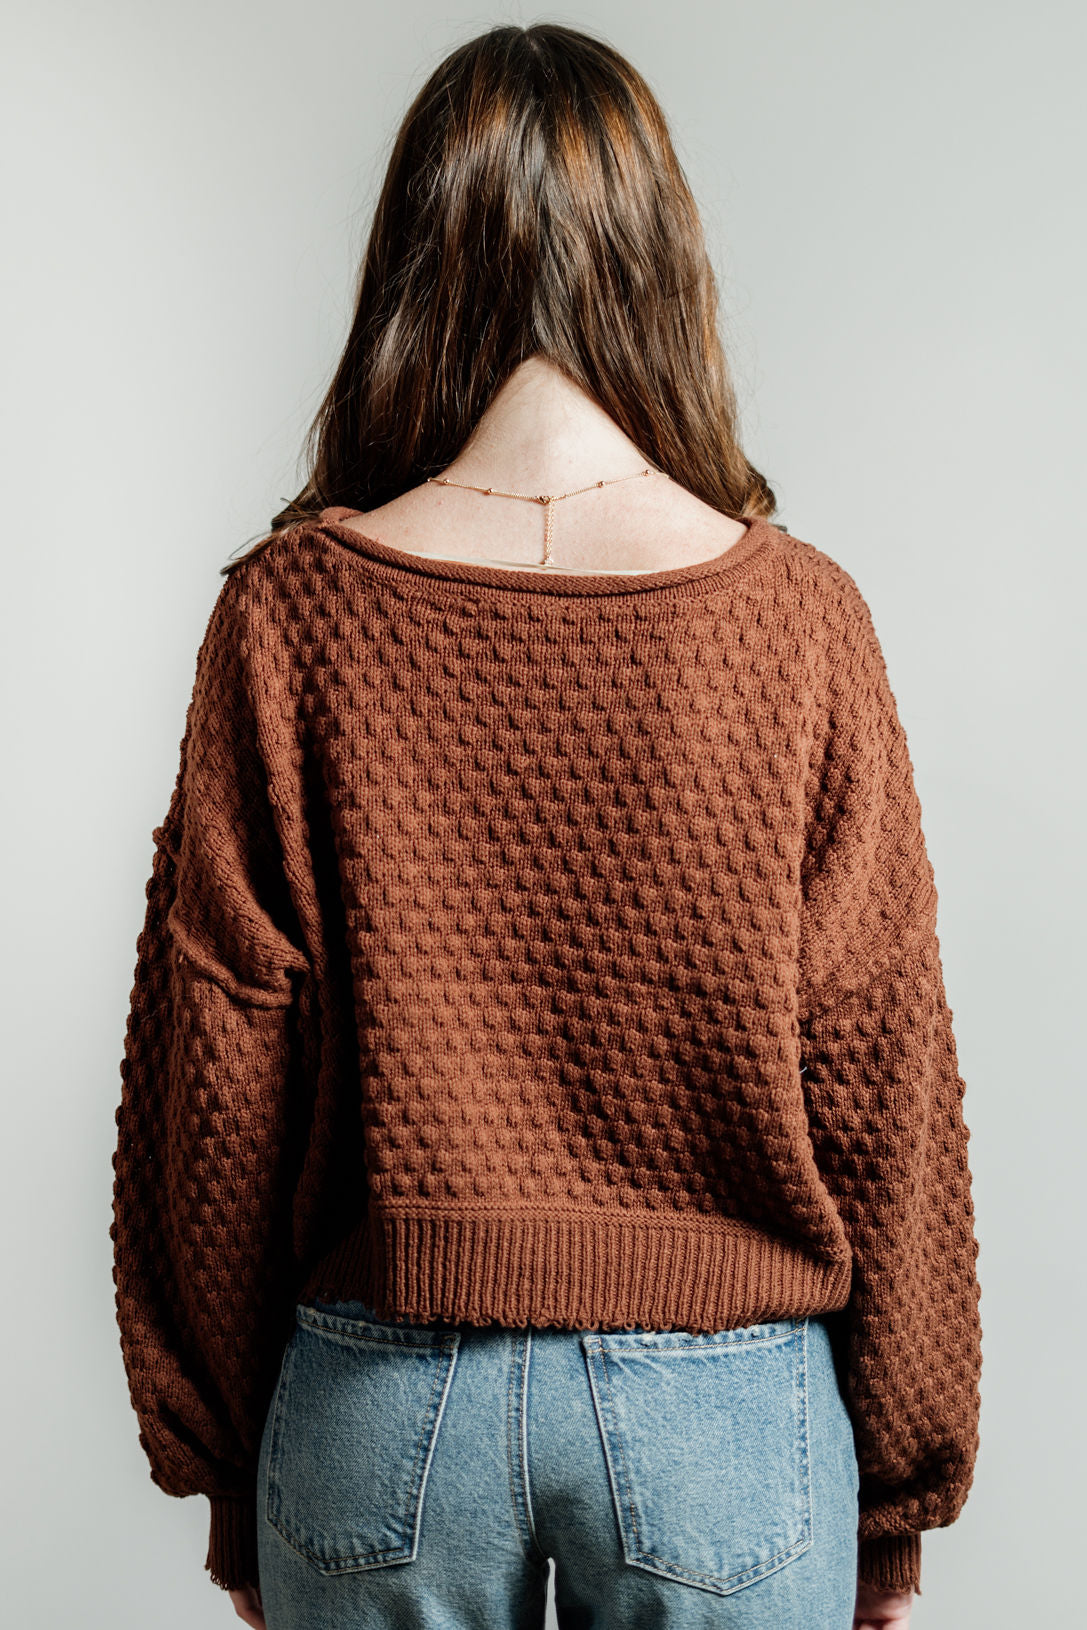 Pictured is a red-brown, knit sweater with a scoop neckline, cropped body, and cuffed knit sleeves.